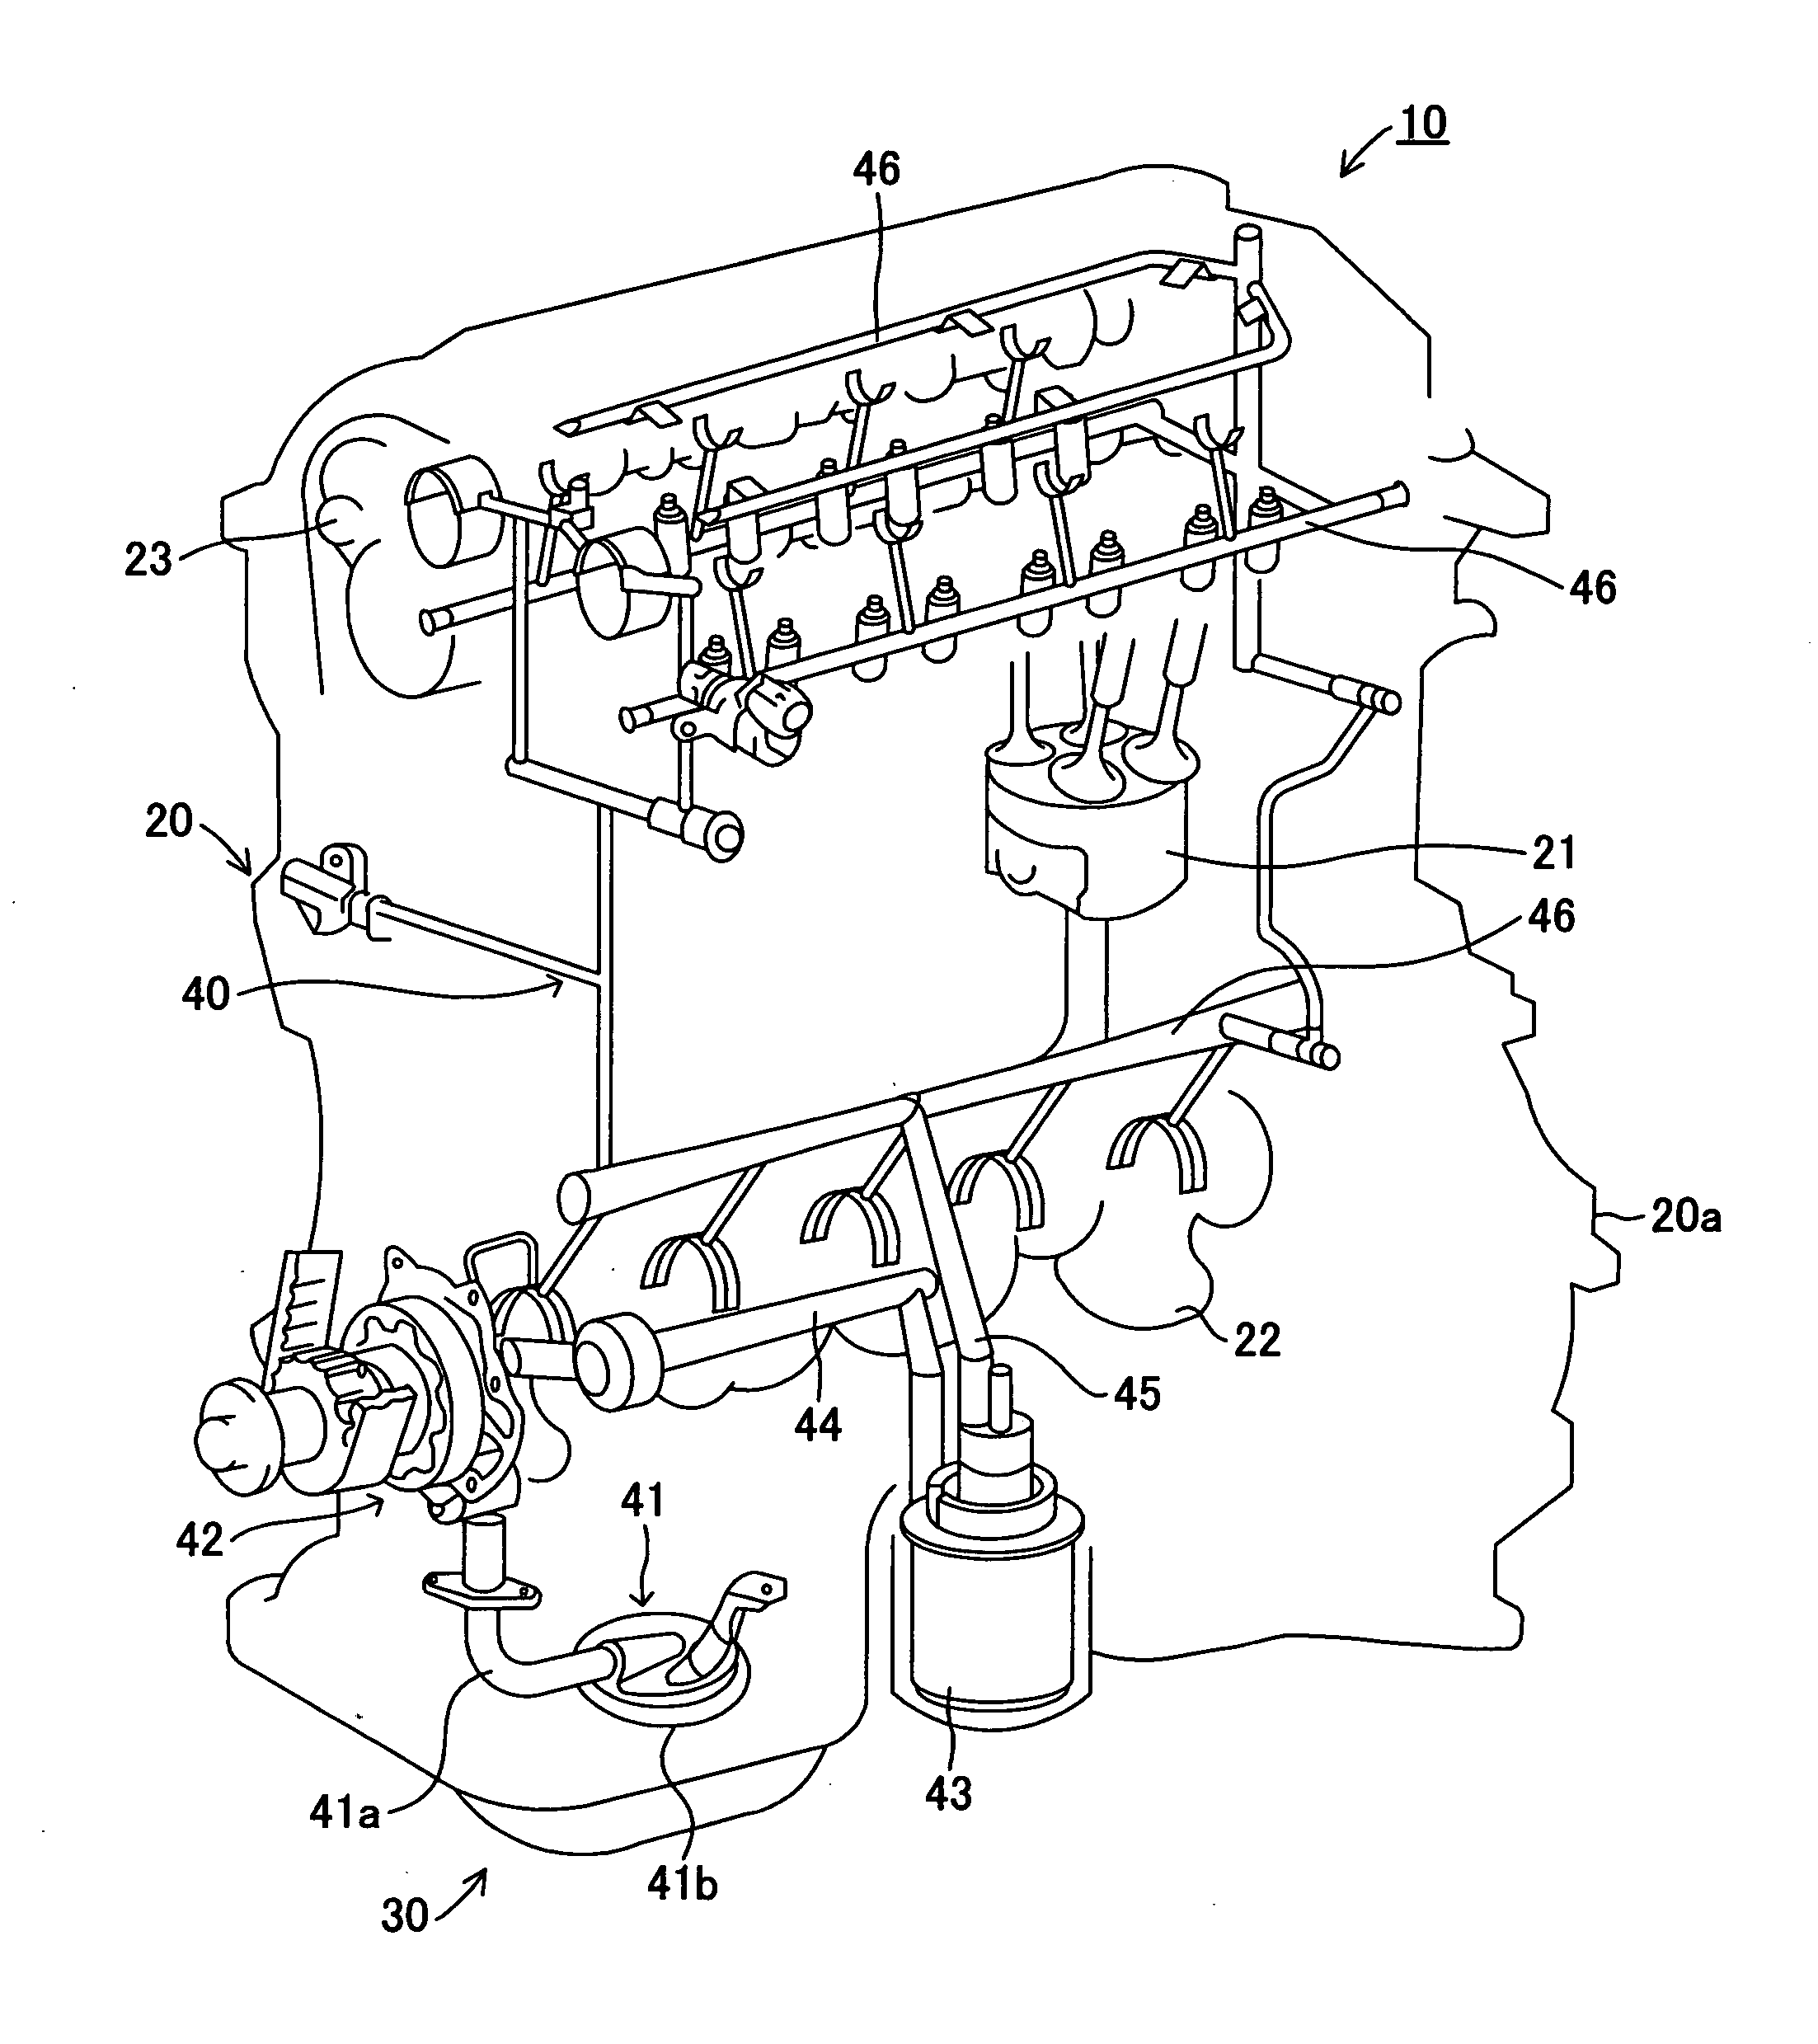 Oil Pan and Lubricating Device